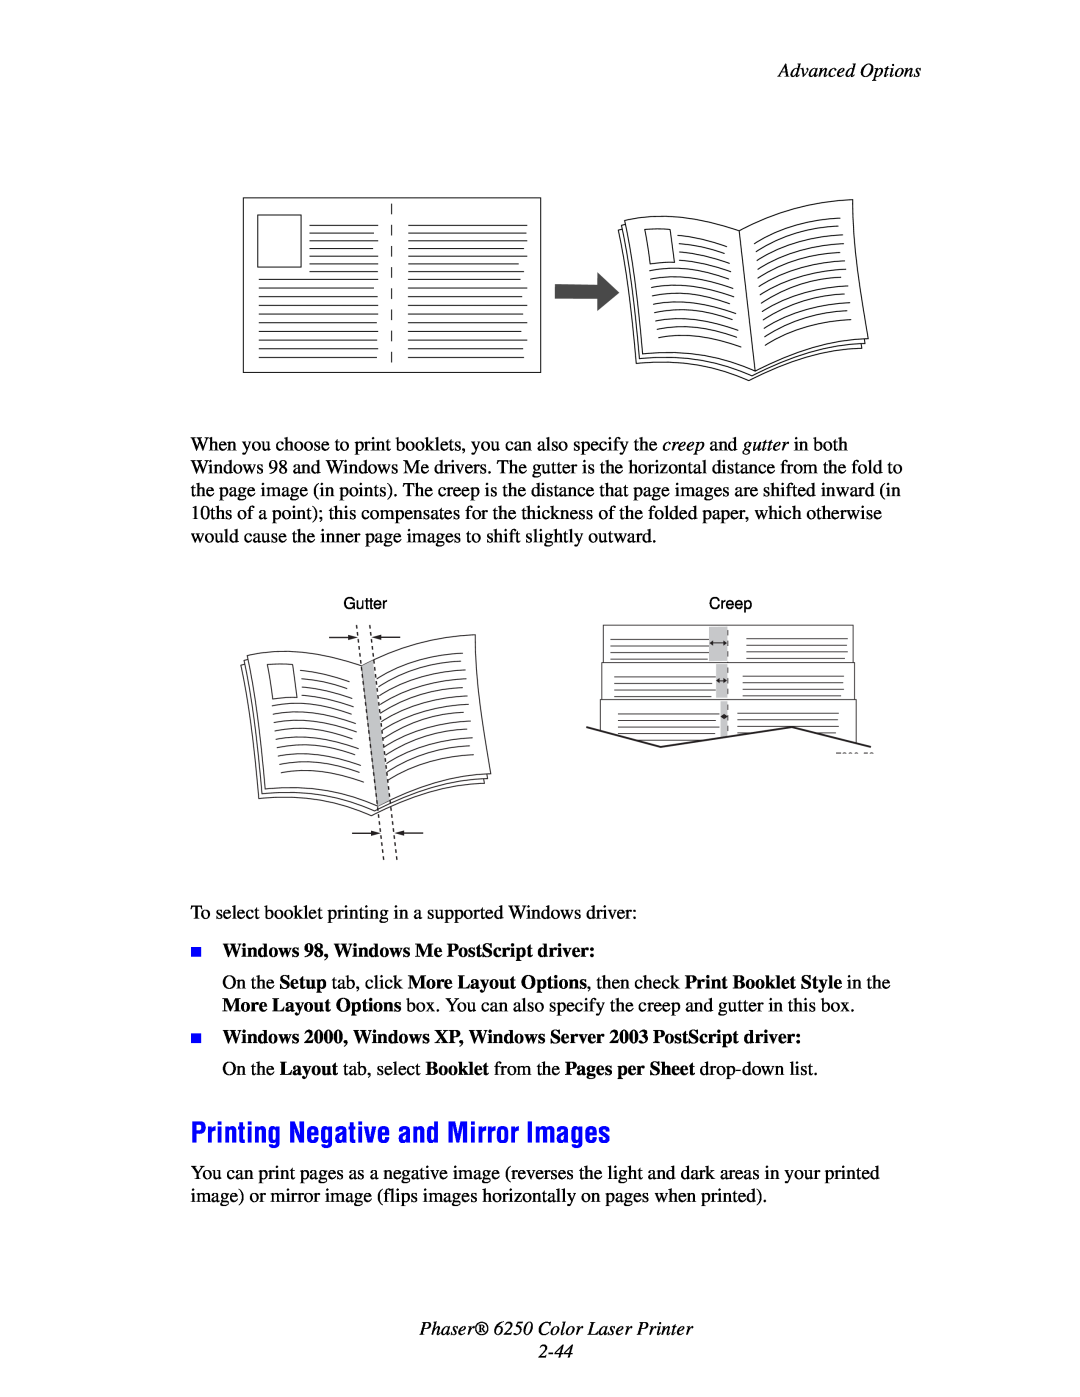 Xerox manual Printing Negative and Mirror Images, Phaser 6250 Color Laser Printer 2-44, Advanced Options 